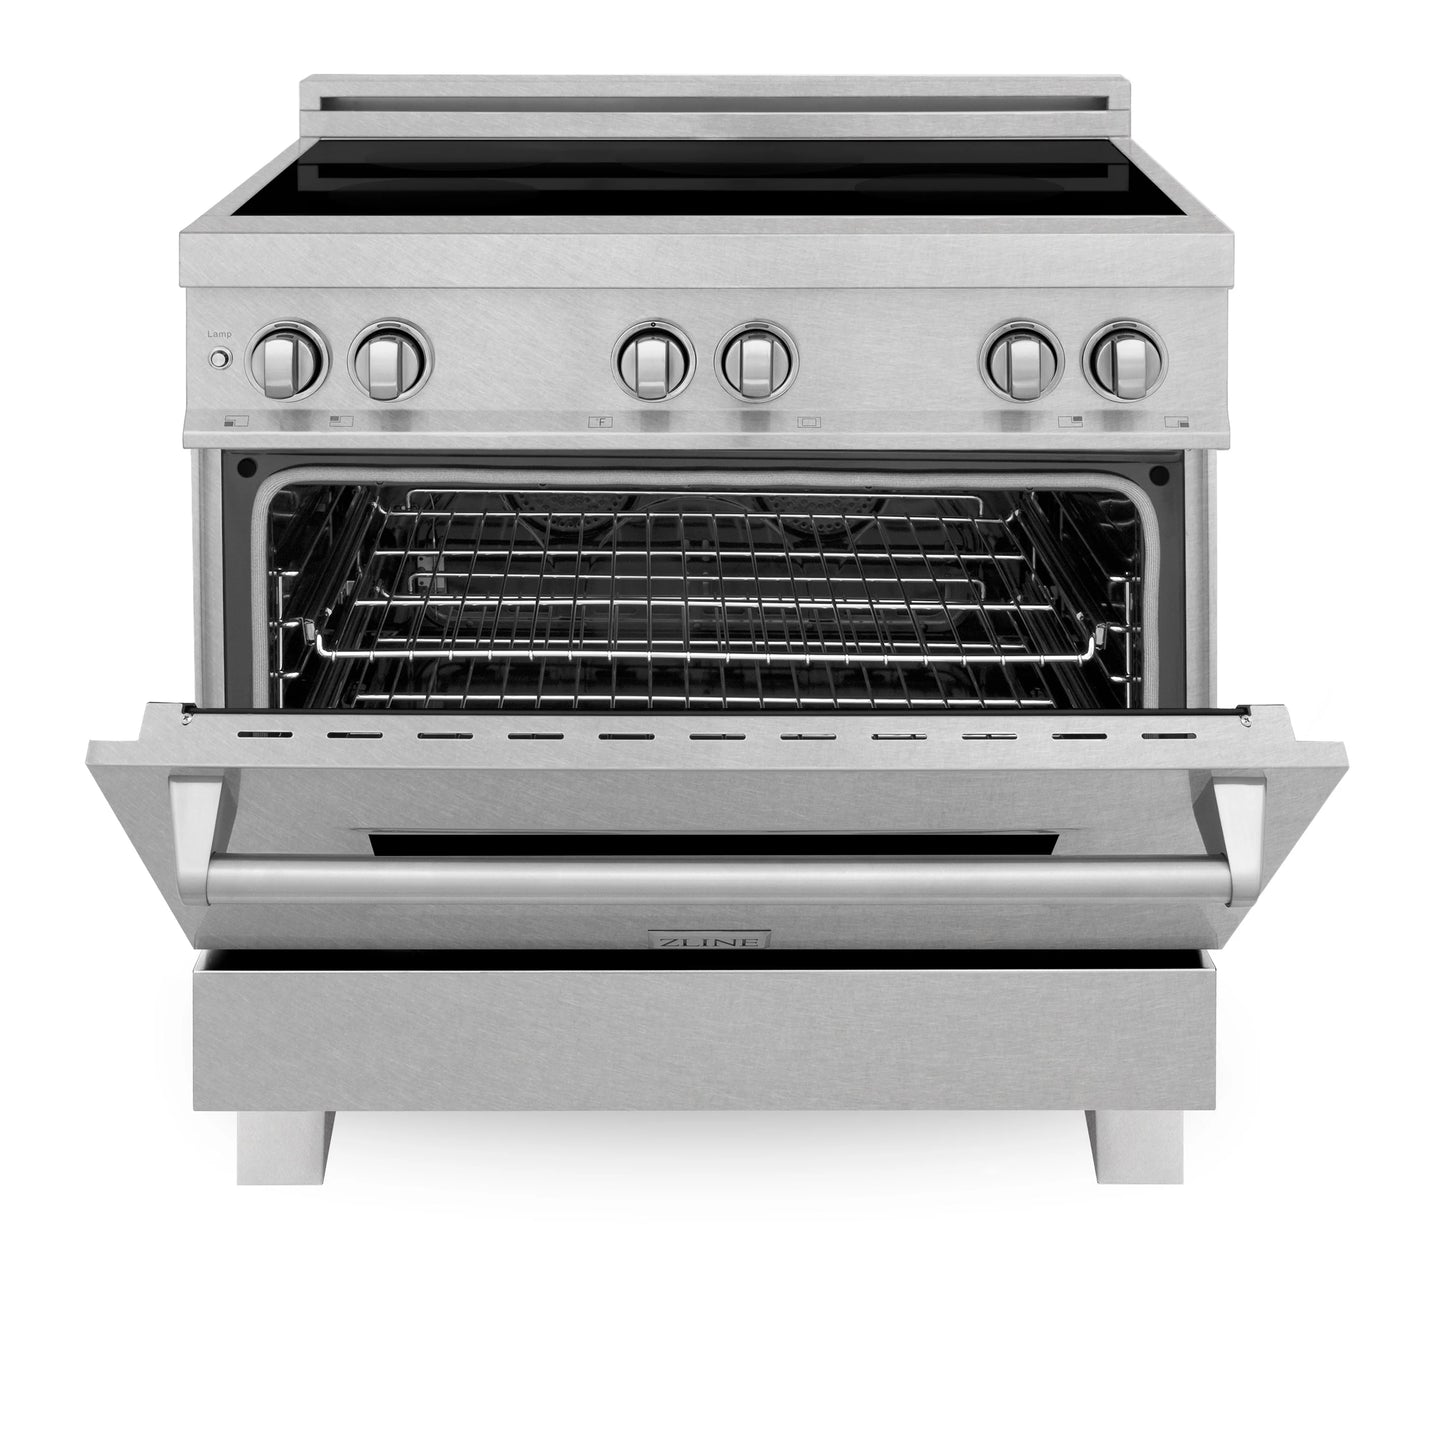 ZLINE 36 in. Induction Range in Fingerprint Resistant DuraSnow Stainless Steel with a 4 Element Stove and Electric Oven (RAINDS-SN-36)